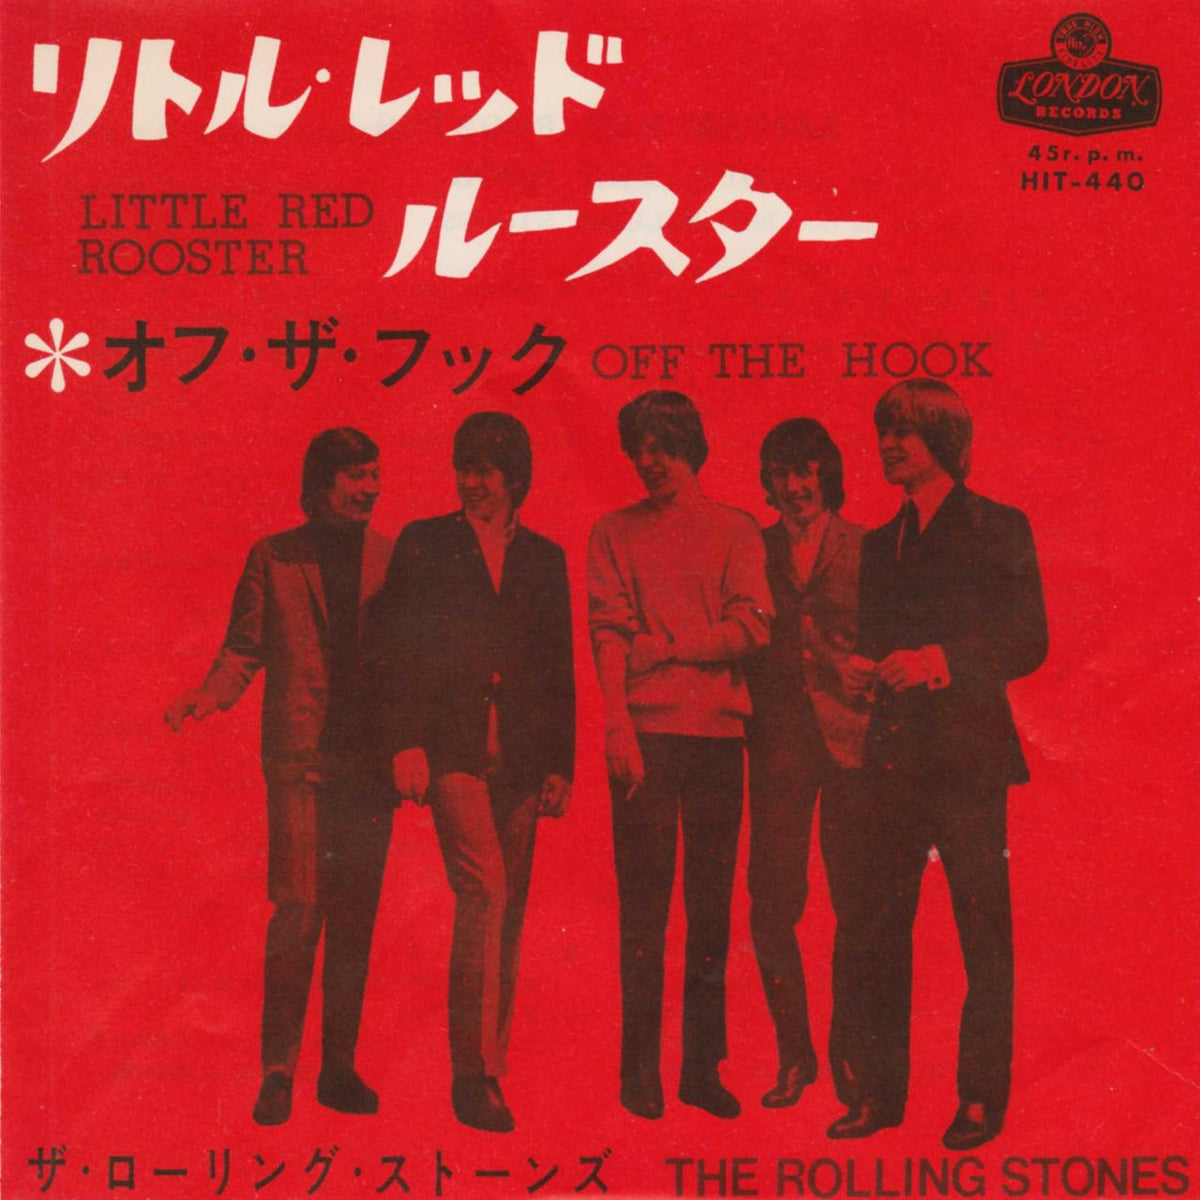 kyst Ewell Violin The Rolling Stones Little Red Rooster Japanese 7" vinyl — RareVinyl.com